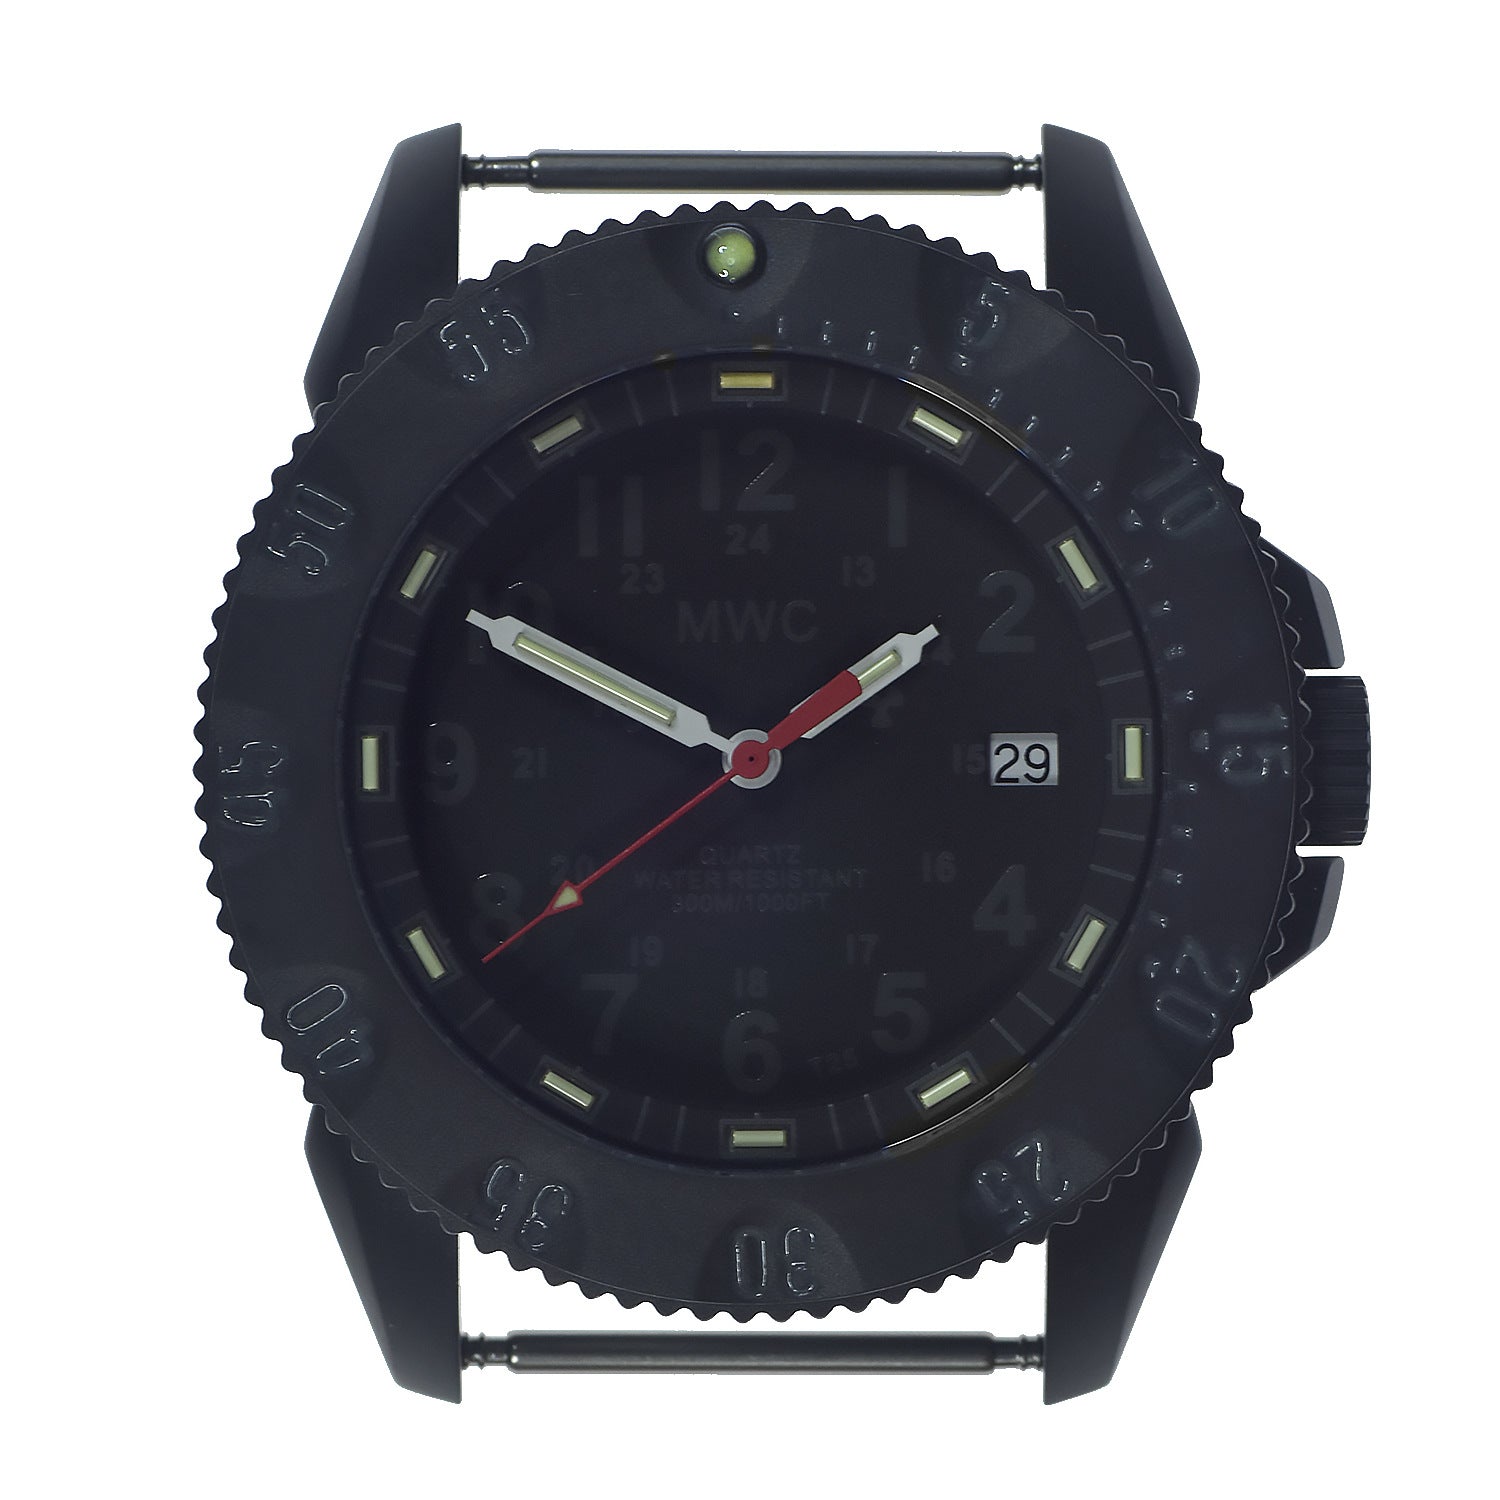 Mwc P656 2023 Model Titanium Tactical Series Watch With Subdued Dial Military Industries